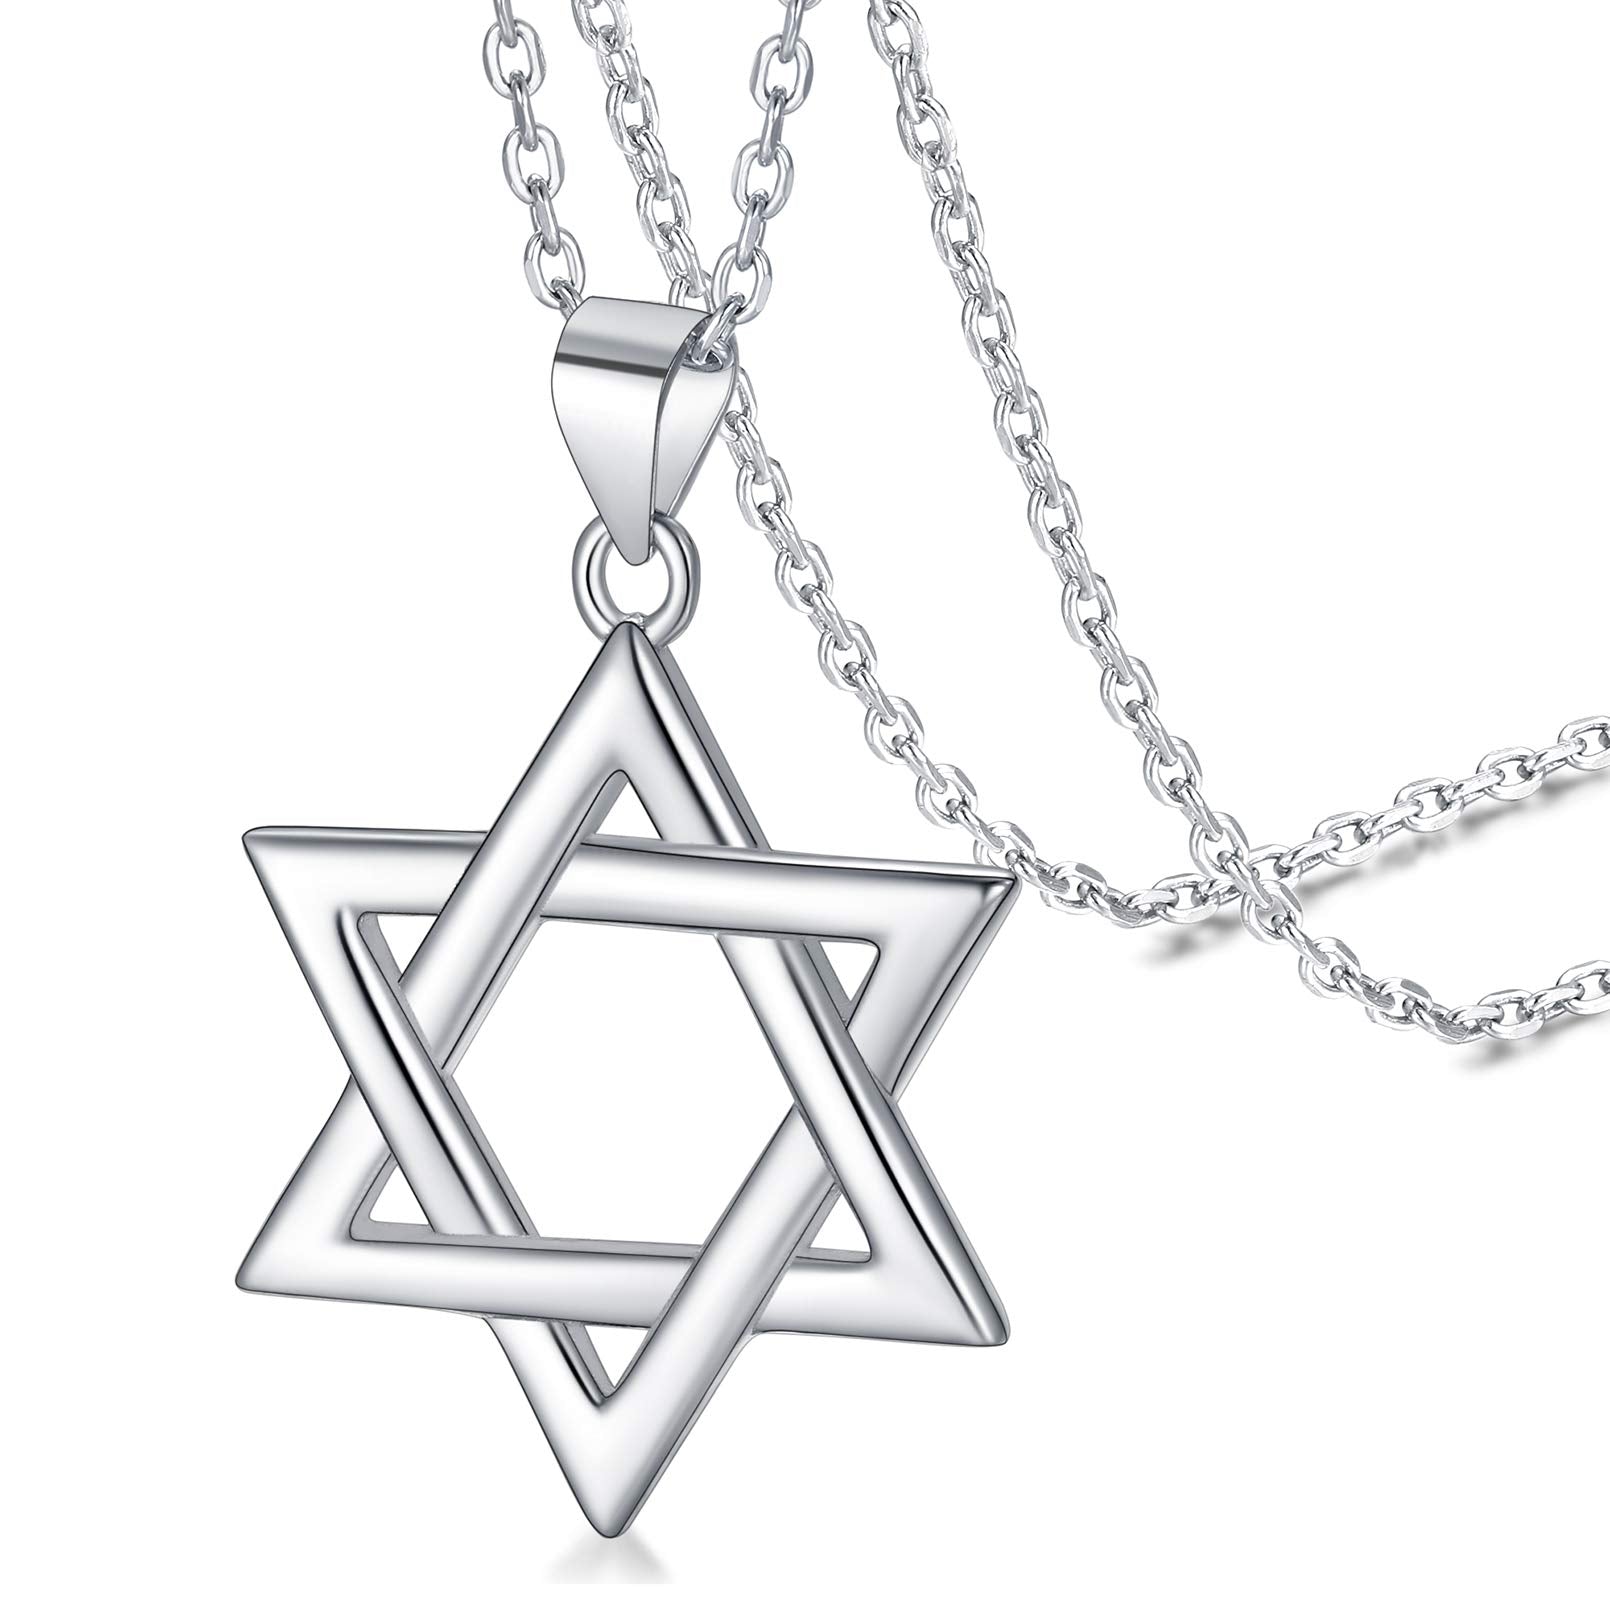 FaithHeart Star of David Hexagram Pendant Jewish Necklace for Men Women Sterling Silver/Stainless Steel Magen David Jewellery with sturdy Chain